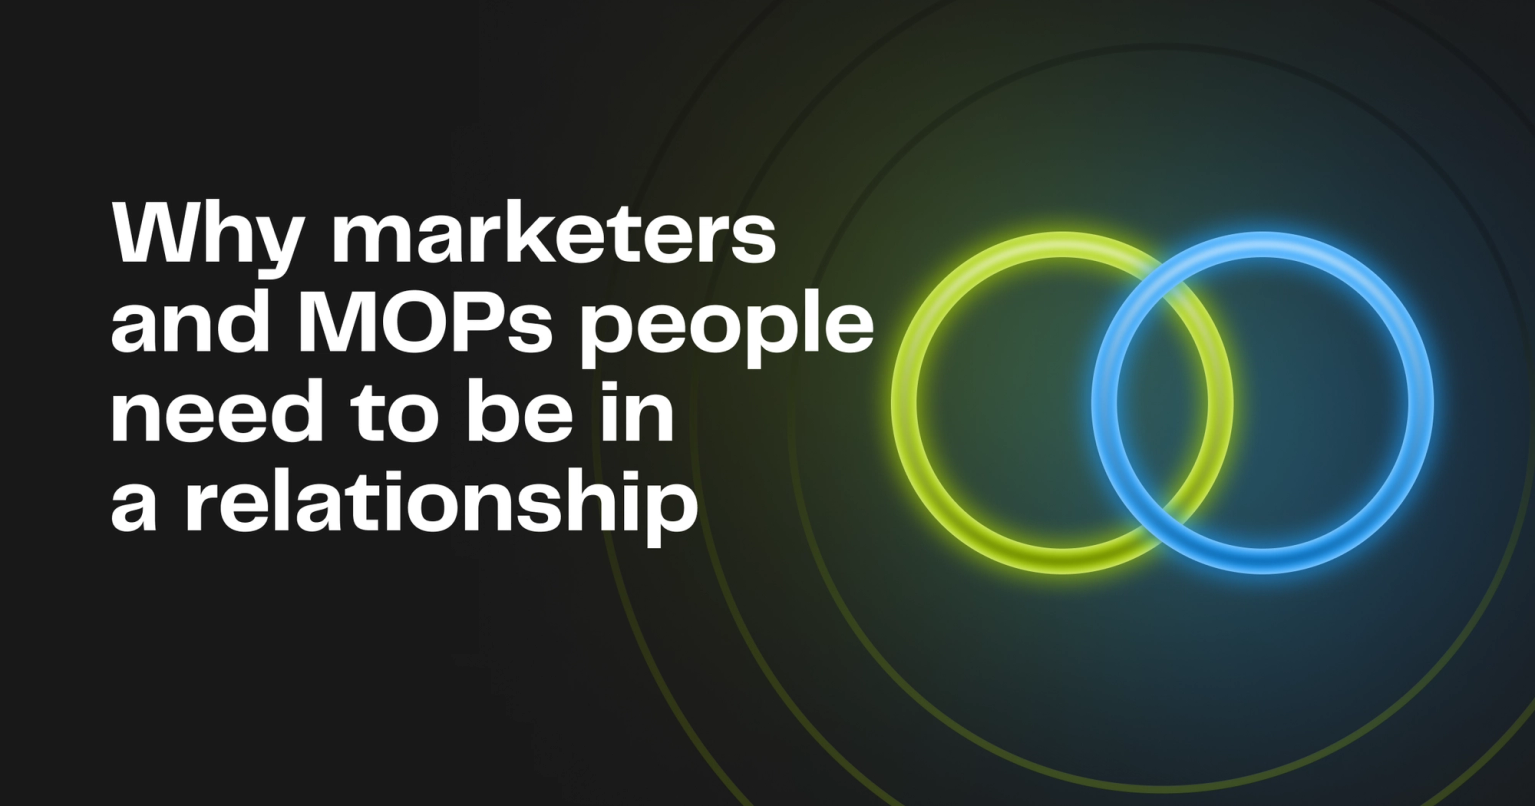 Why marketers and MOPs people need to be in a relationship